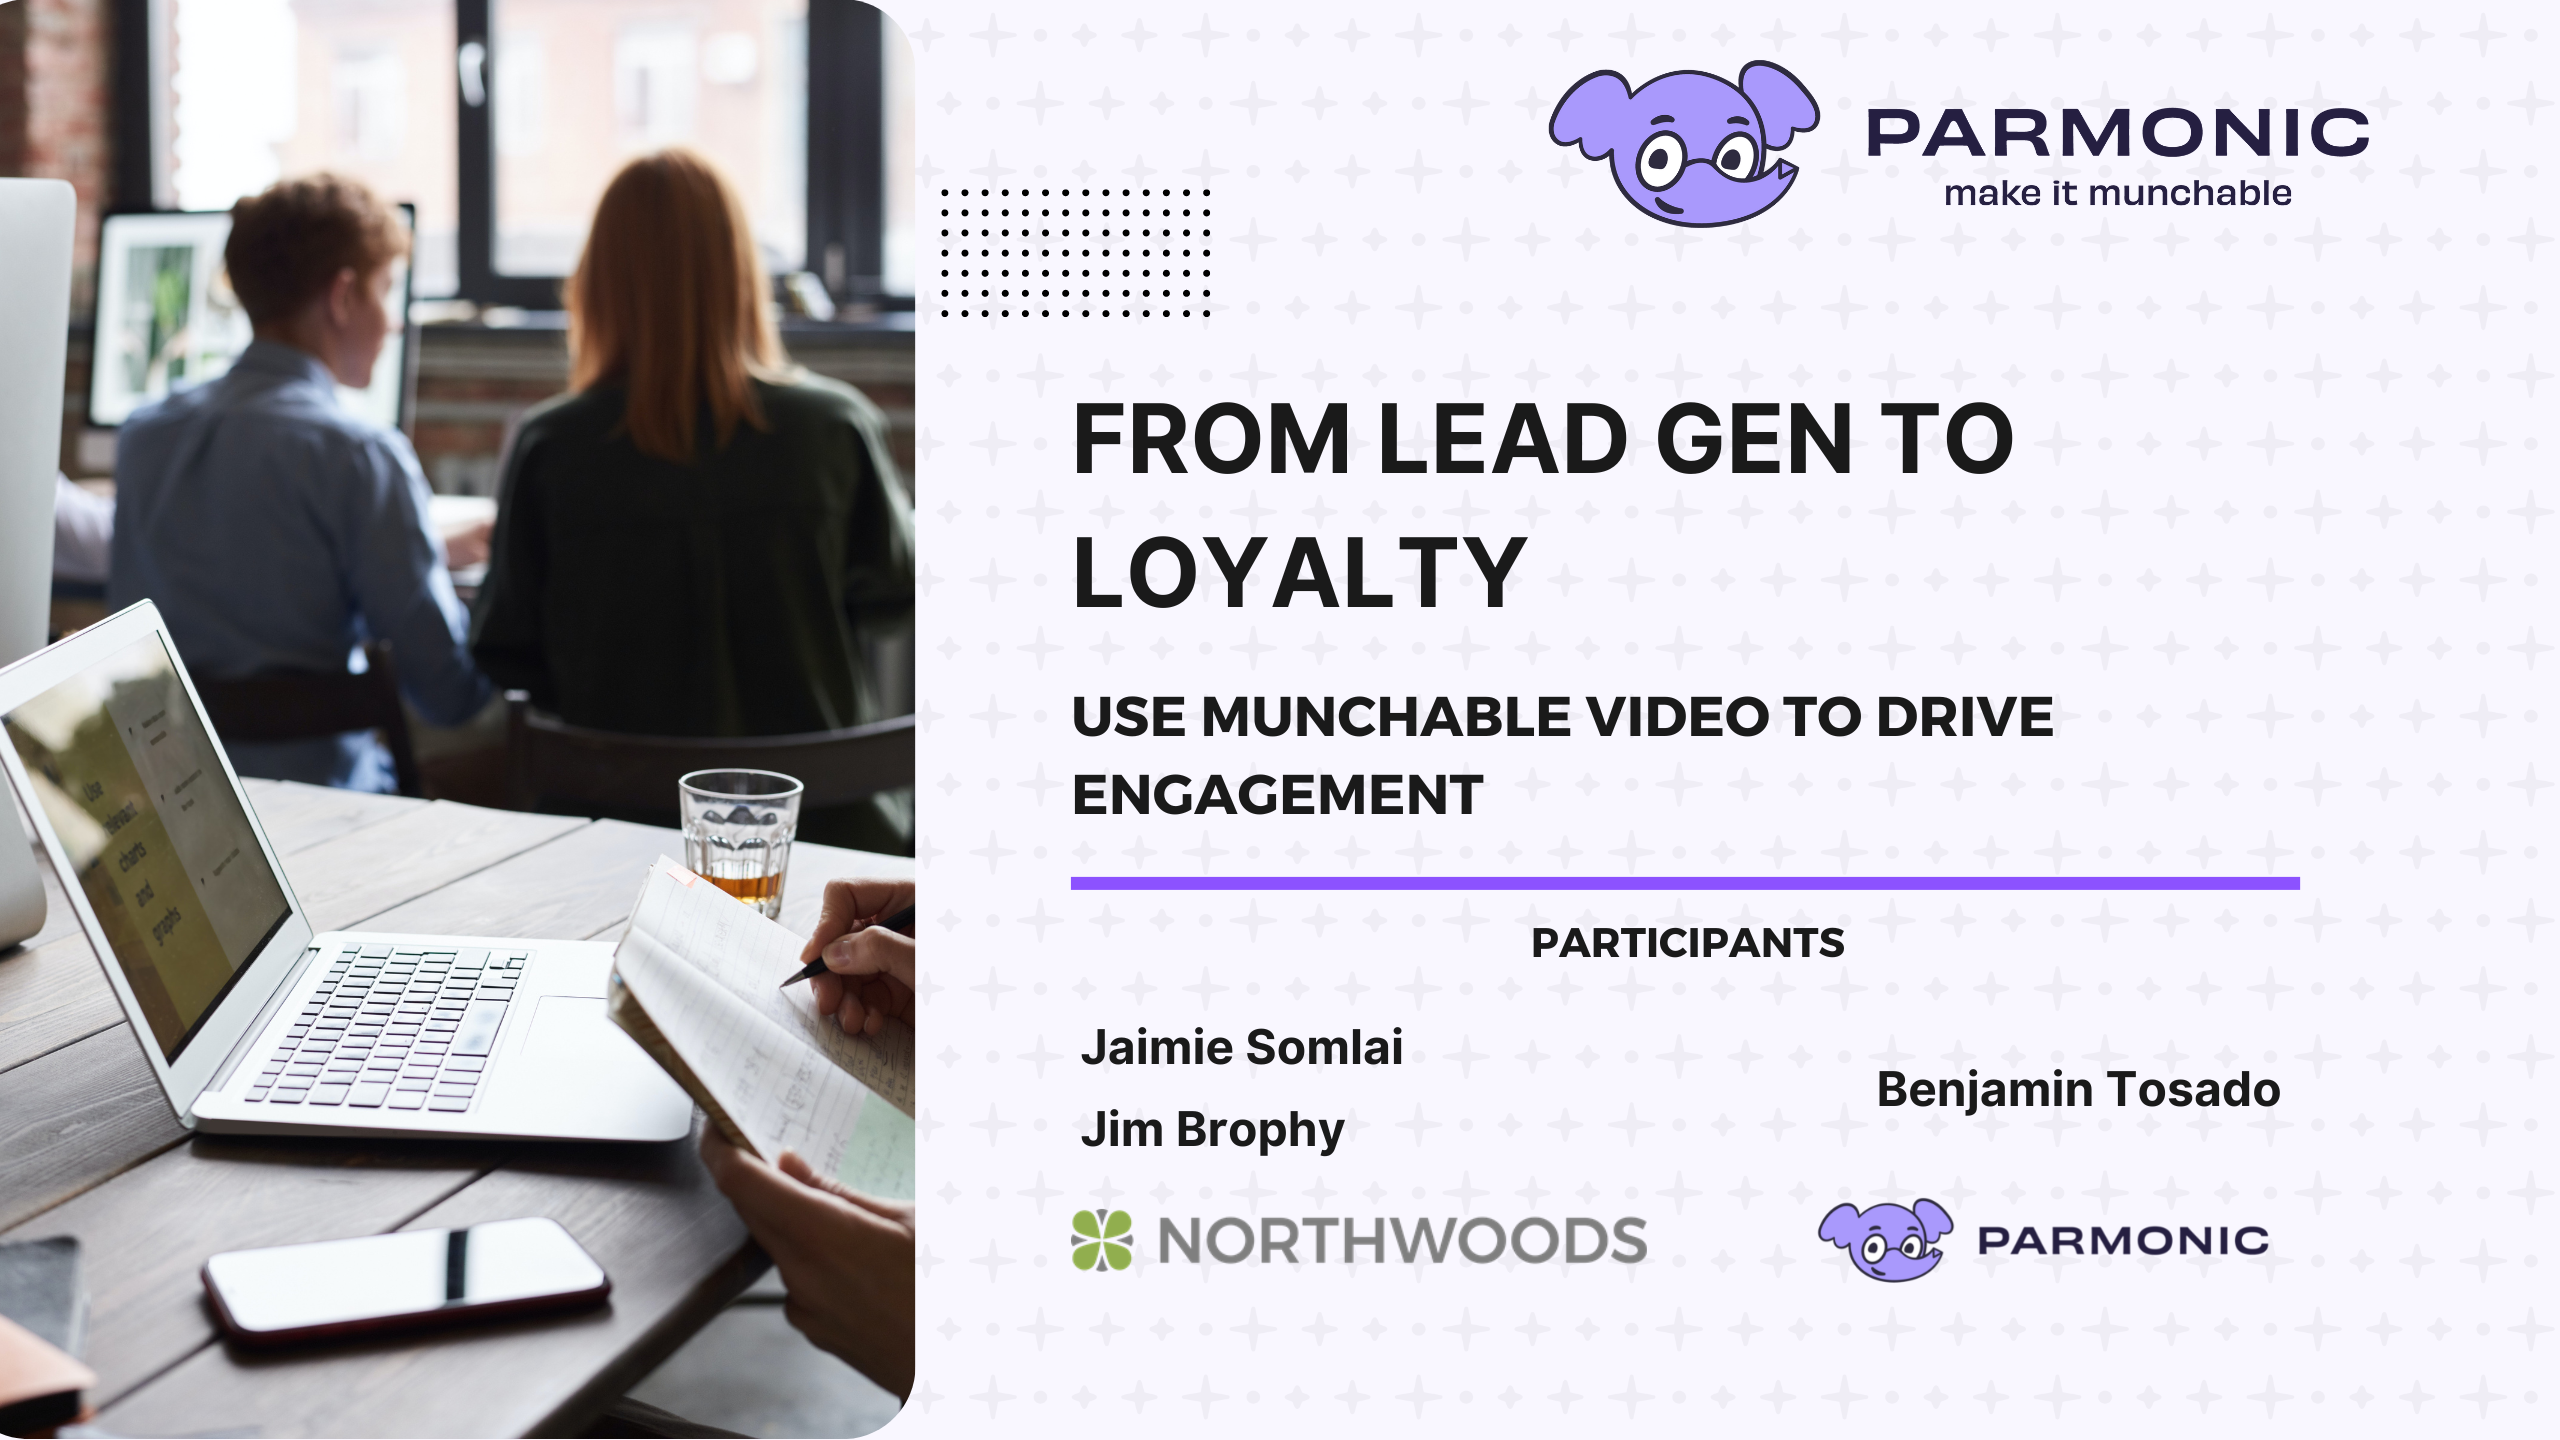 From Lead Gen to Loyalty, Use Munchable Video to Drive Engagement